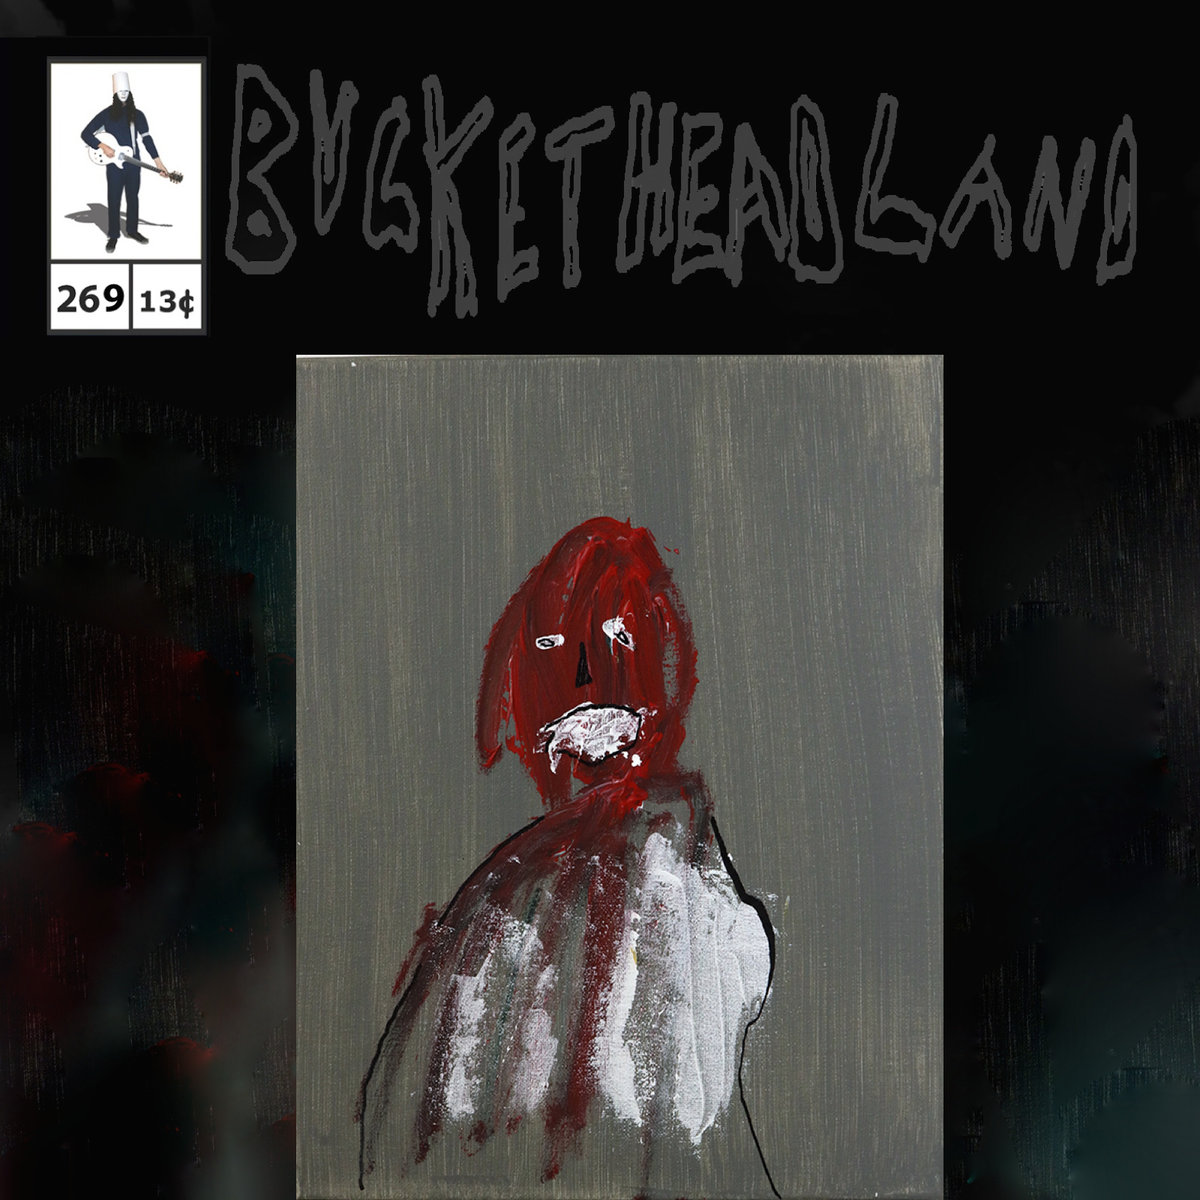 Buckethead - Pike 269: Decaying Parchment (2017)